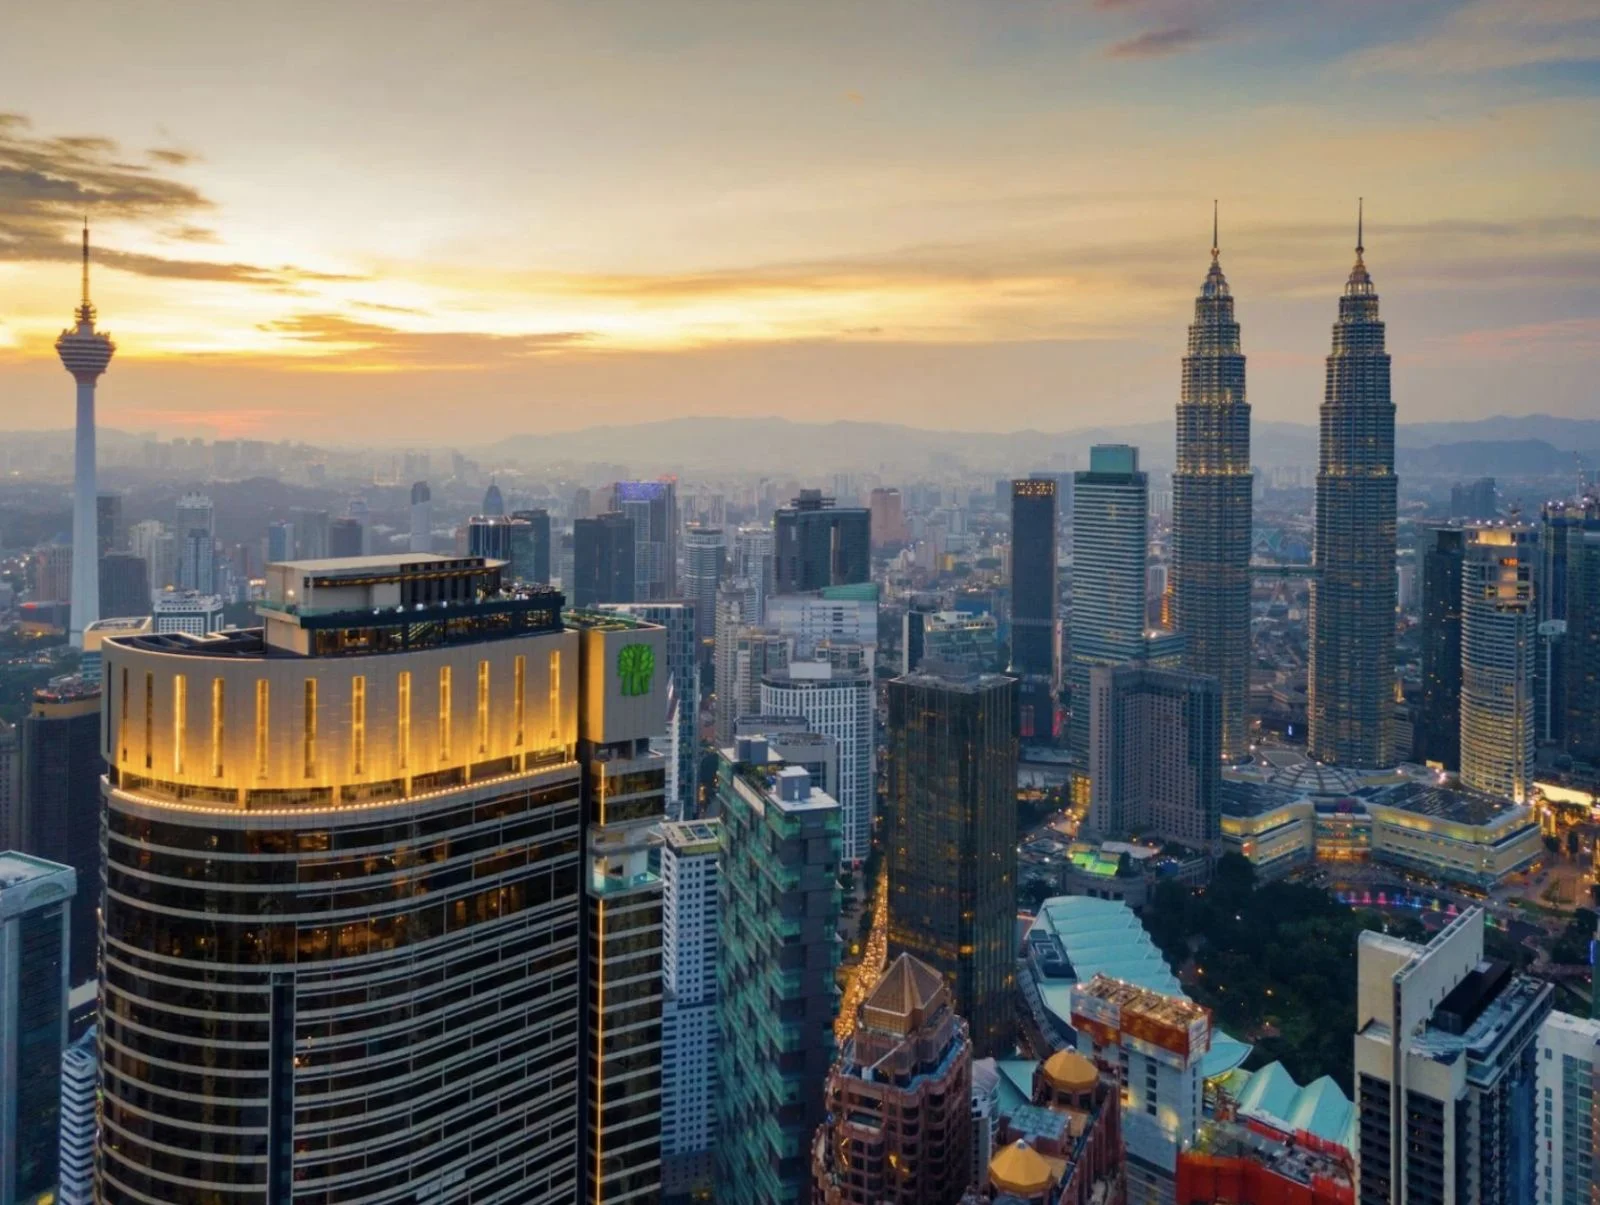 Four Seasons Hotel Kuala Lumpur Collaborates with Renowned